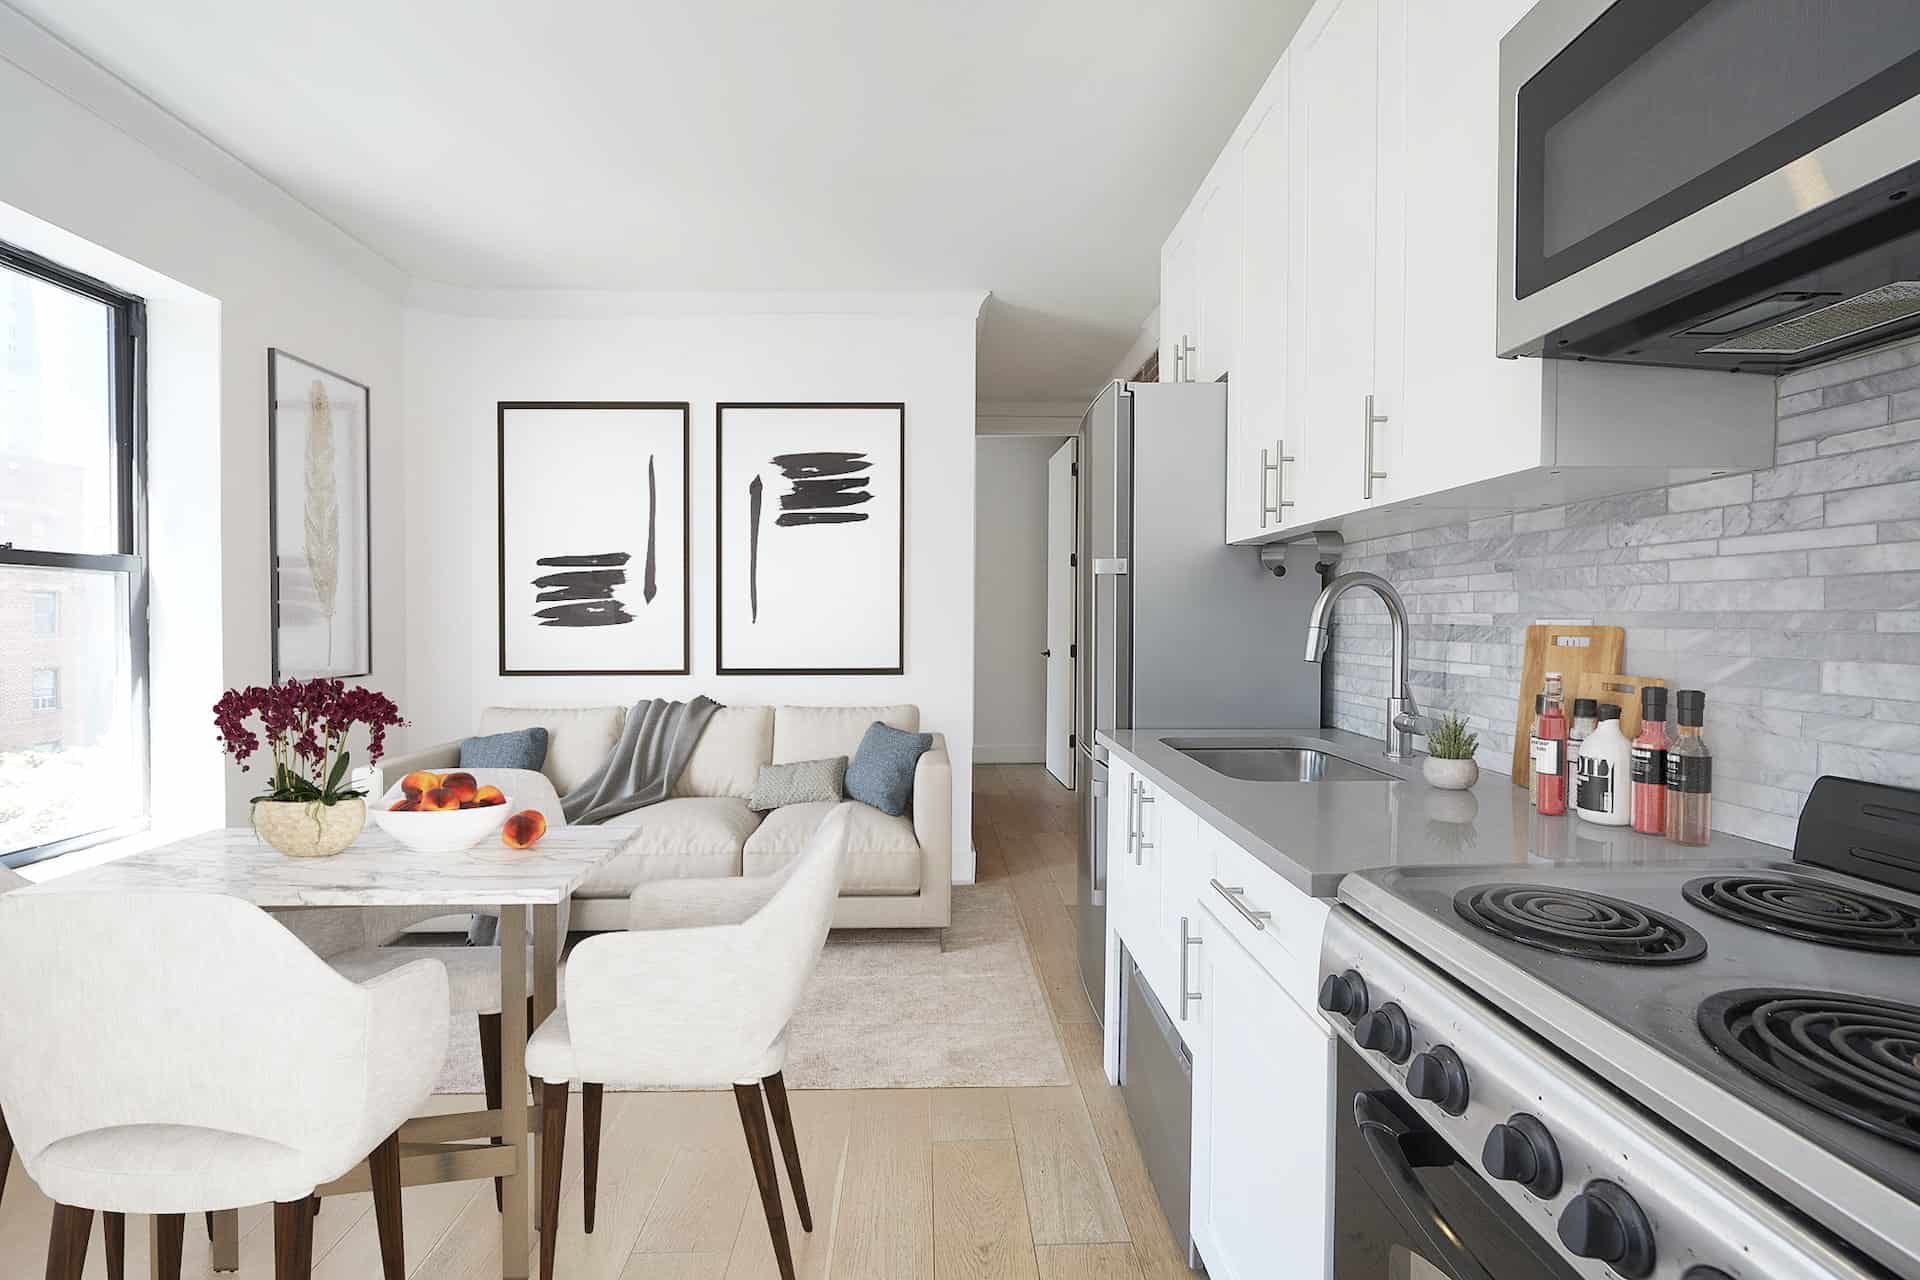 Kitchen at 401 East 50th Street apartments with stone countertops, stainless steel appliances and hardwood floors.